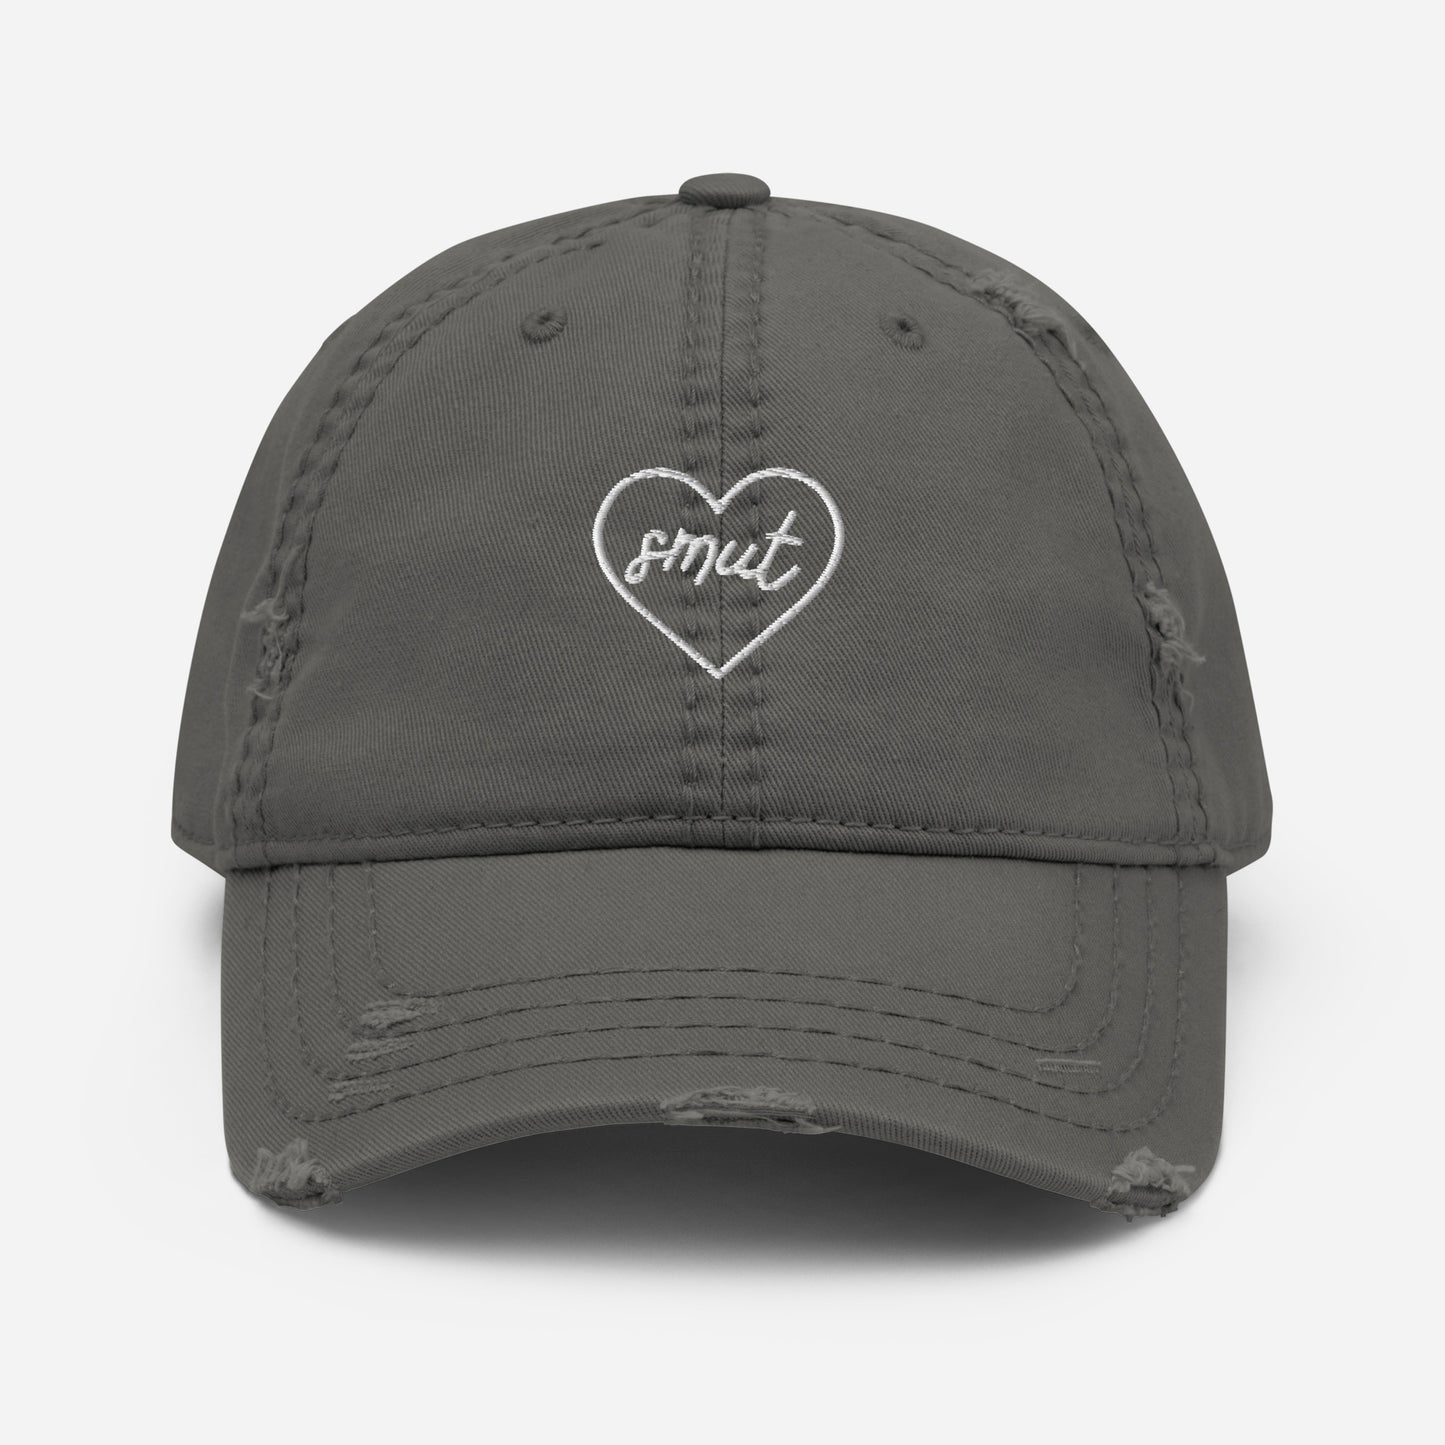 smut heart distressed dad hat